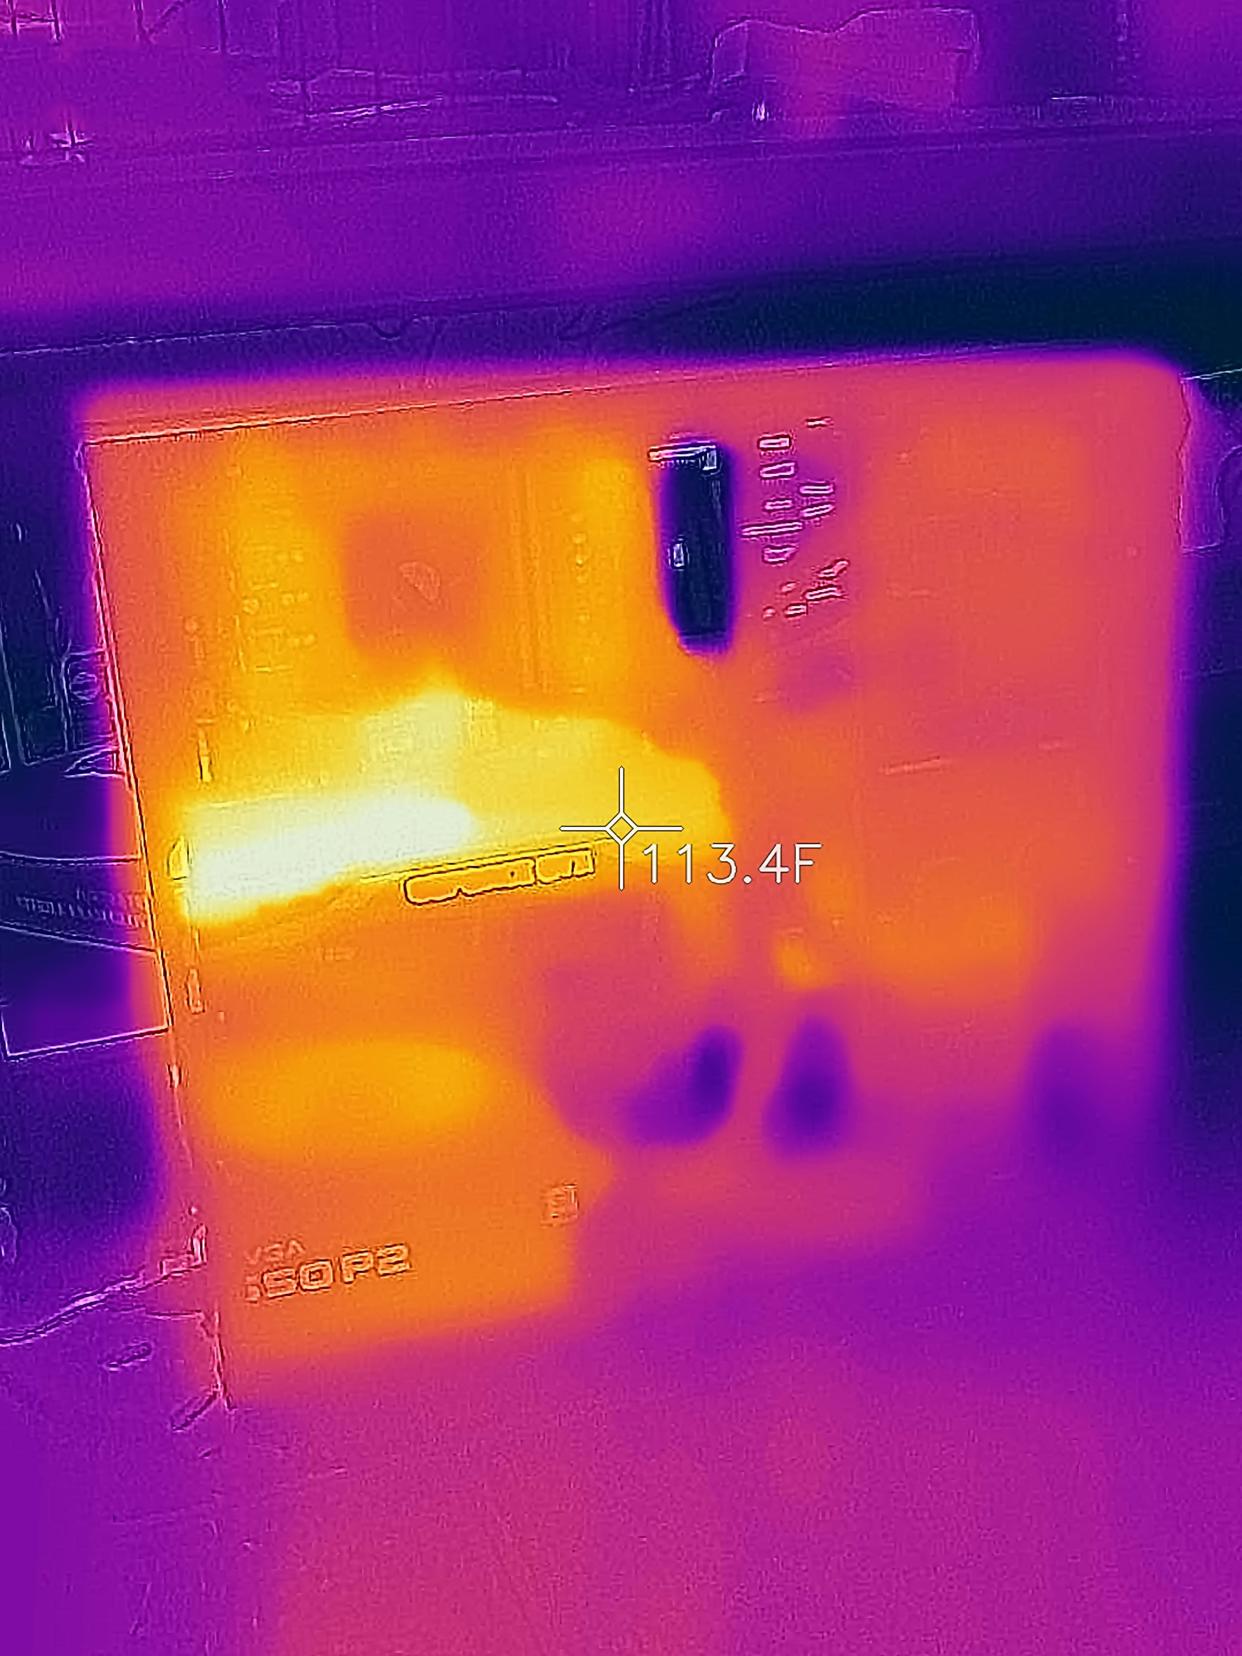 Thermal camera image showing the heat generated by a computer with an NVIDIA 1070 graphics card engaged in the mining of cryptocurrency including Bitcoin, San Ramon, California, October 17, 2019. (Photo by Smith Collection/Gado/Getty Images)